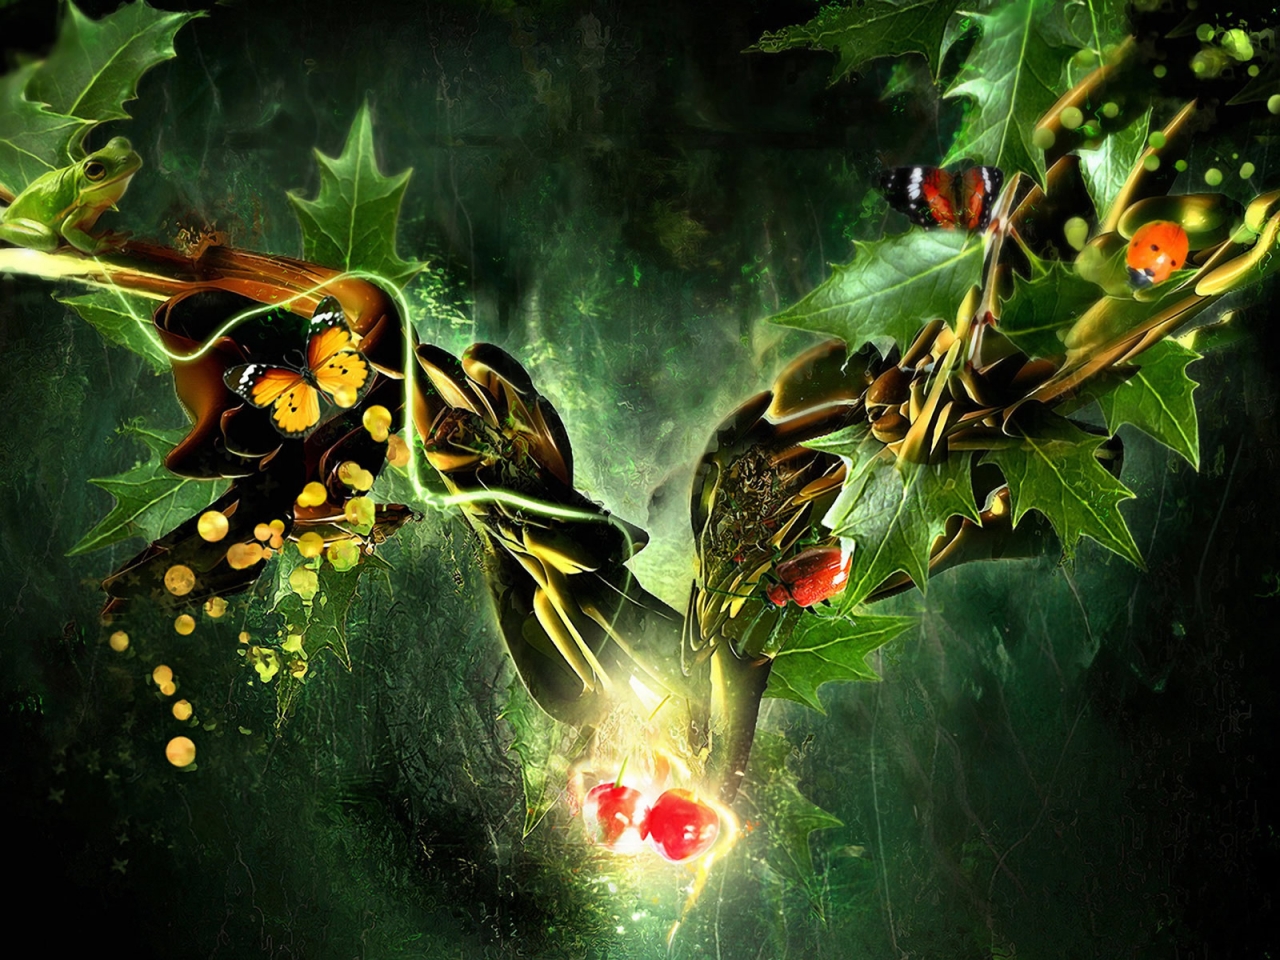 Butterfly, Ladybug, Frog in a Fantasy World for 1280 x 960 resolution